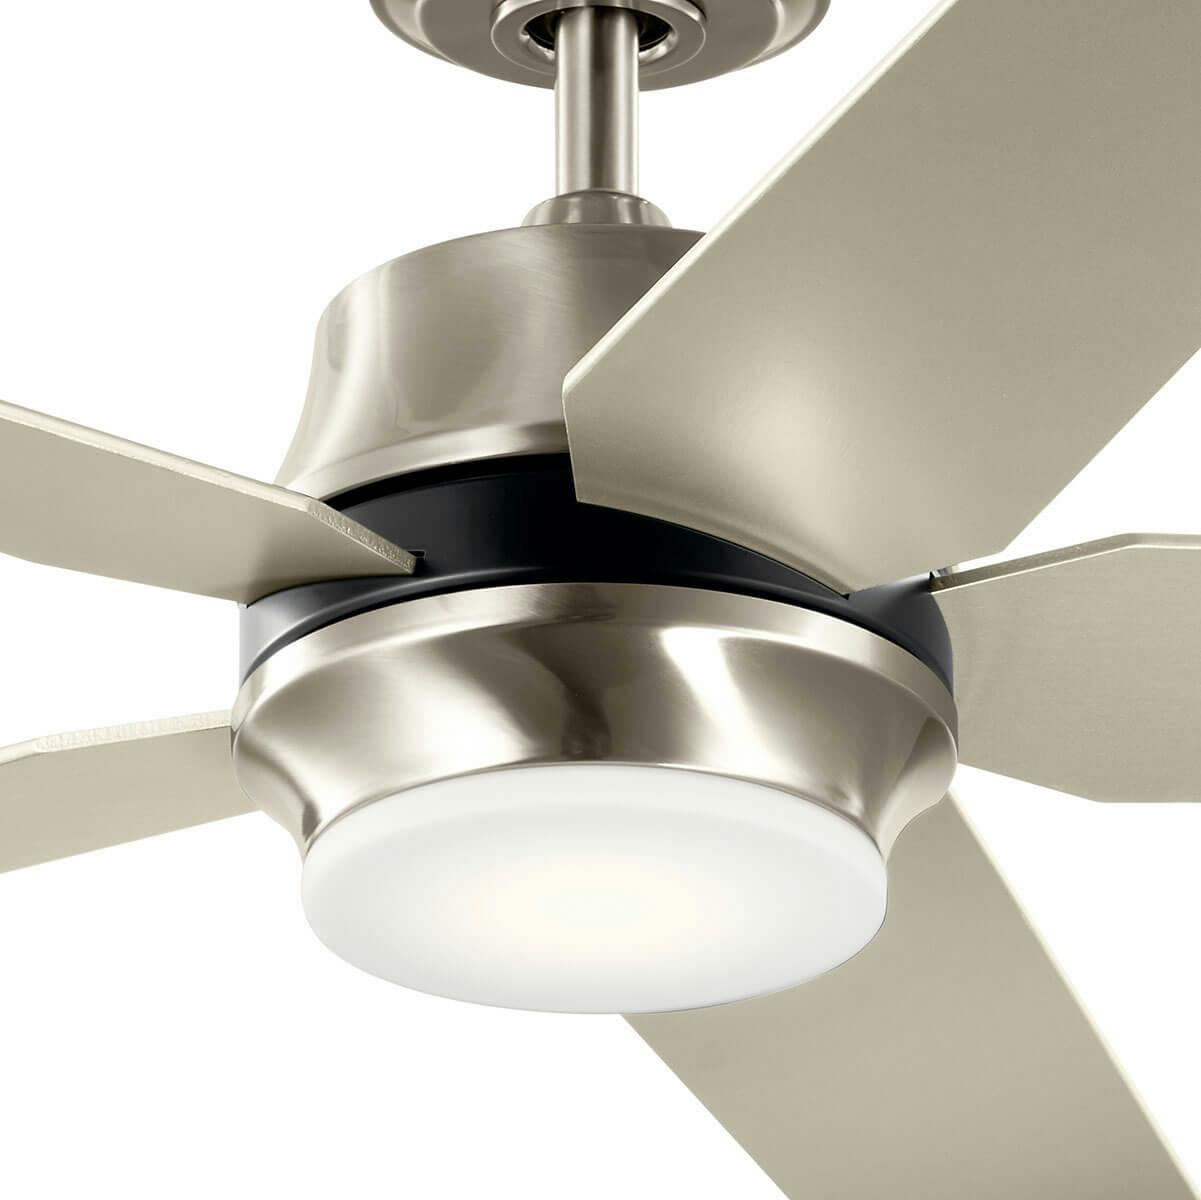 Close up view of the Maeve LED 52" Ceiling Fan Stainless Steel on a white background